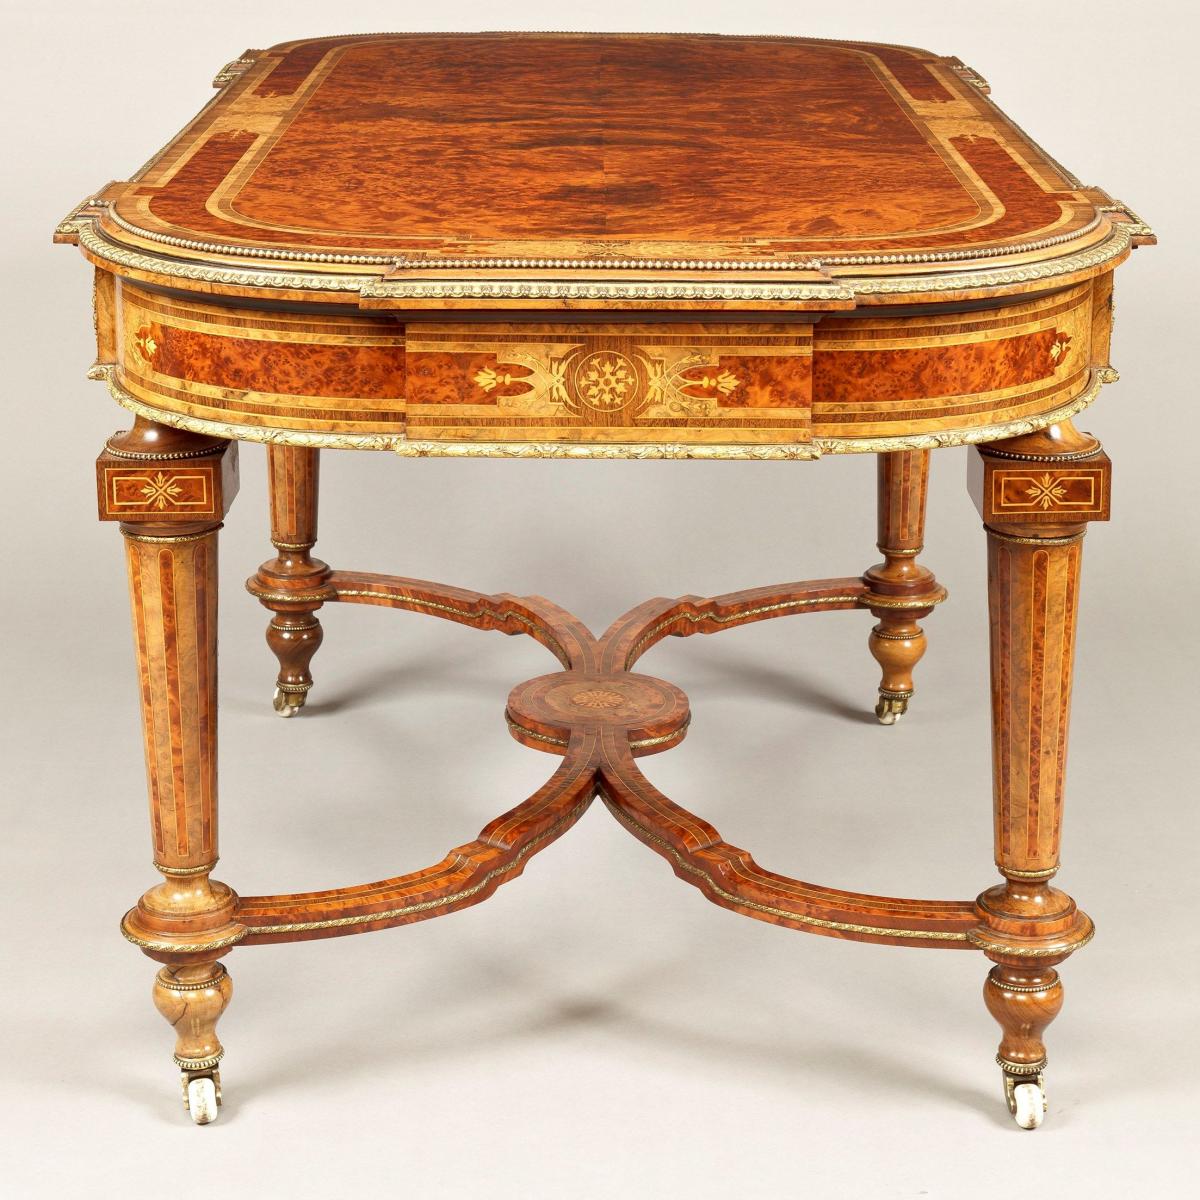 Centre Table In the Louis XVIth Manner of Holland & Sons